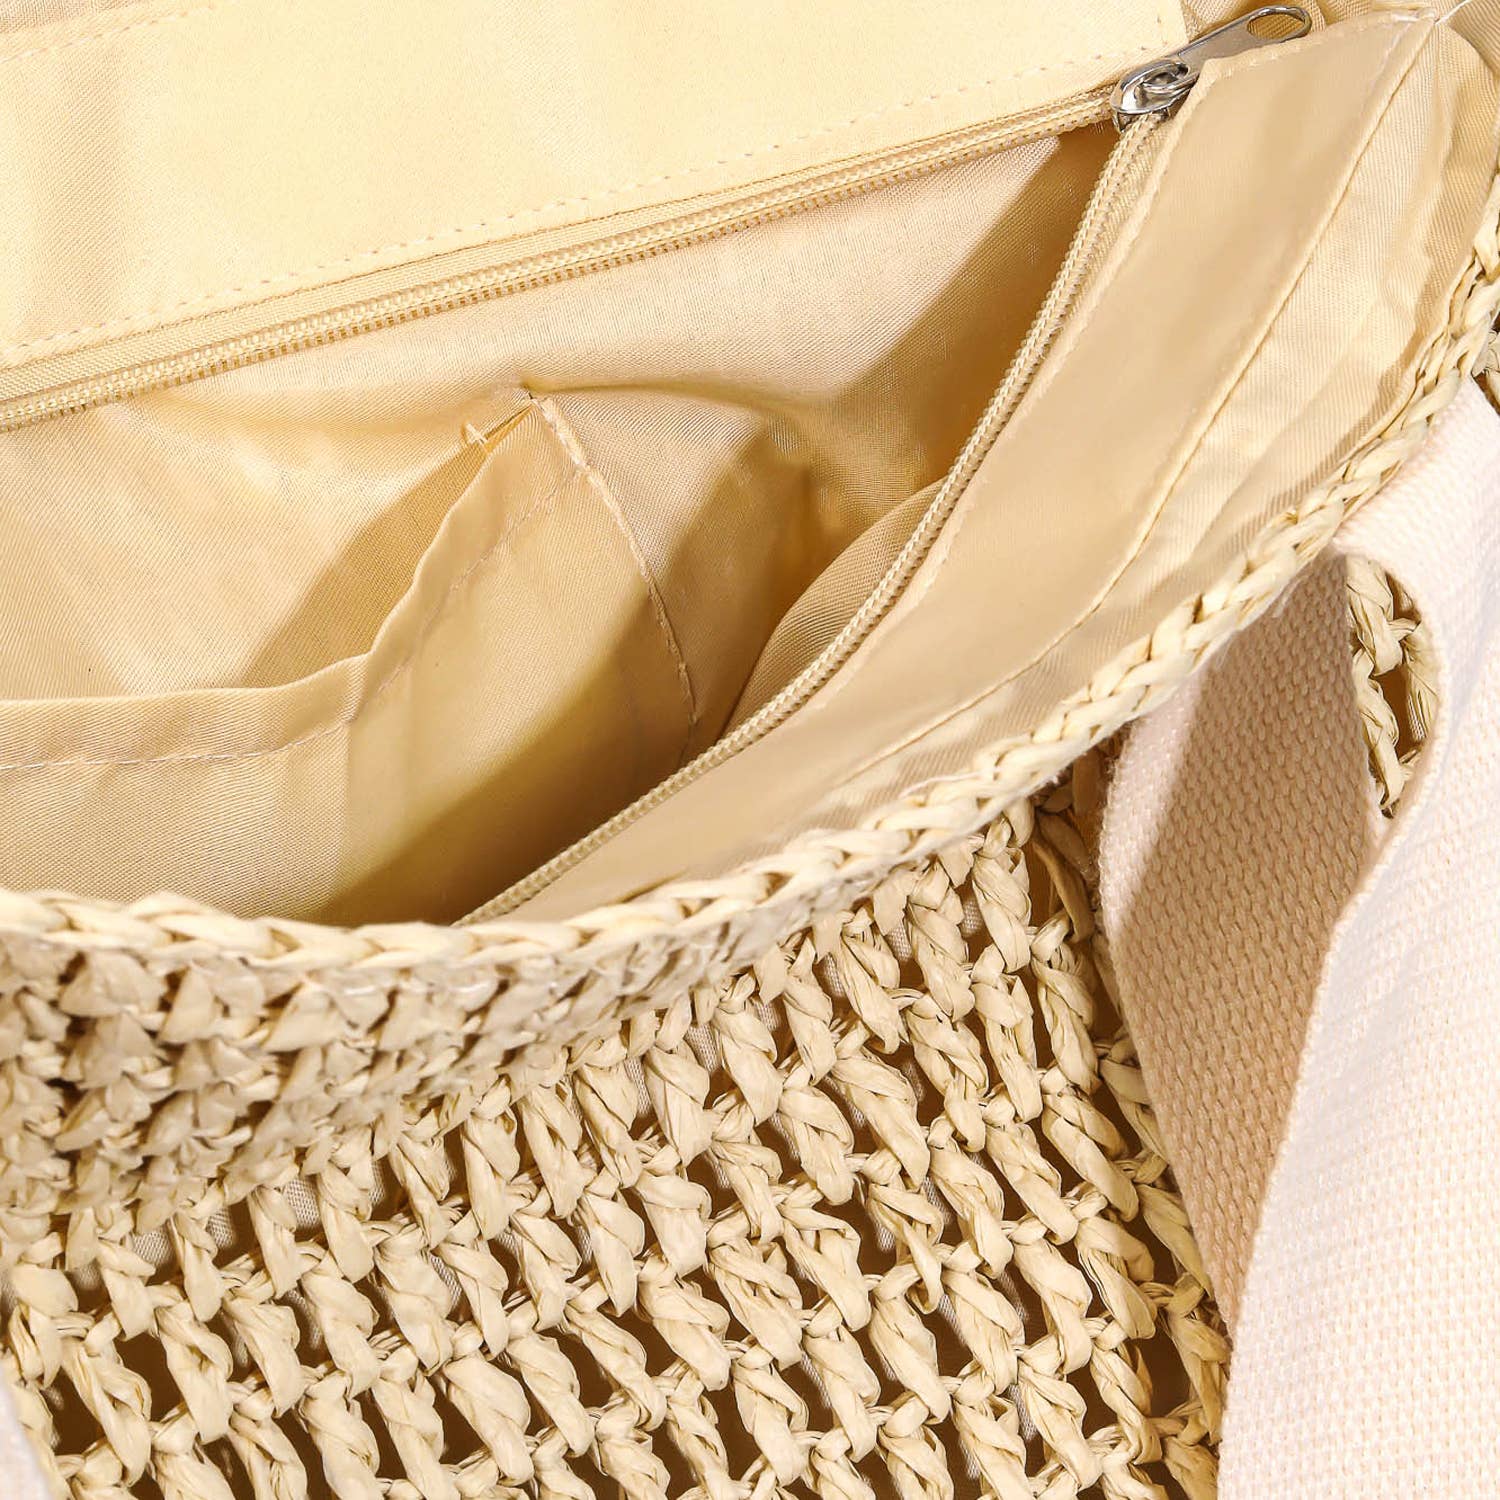 Collections by Fame Accessories - Straw Braided Hat Holder Tote Bag